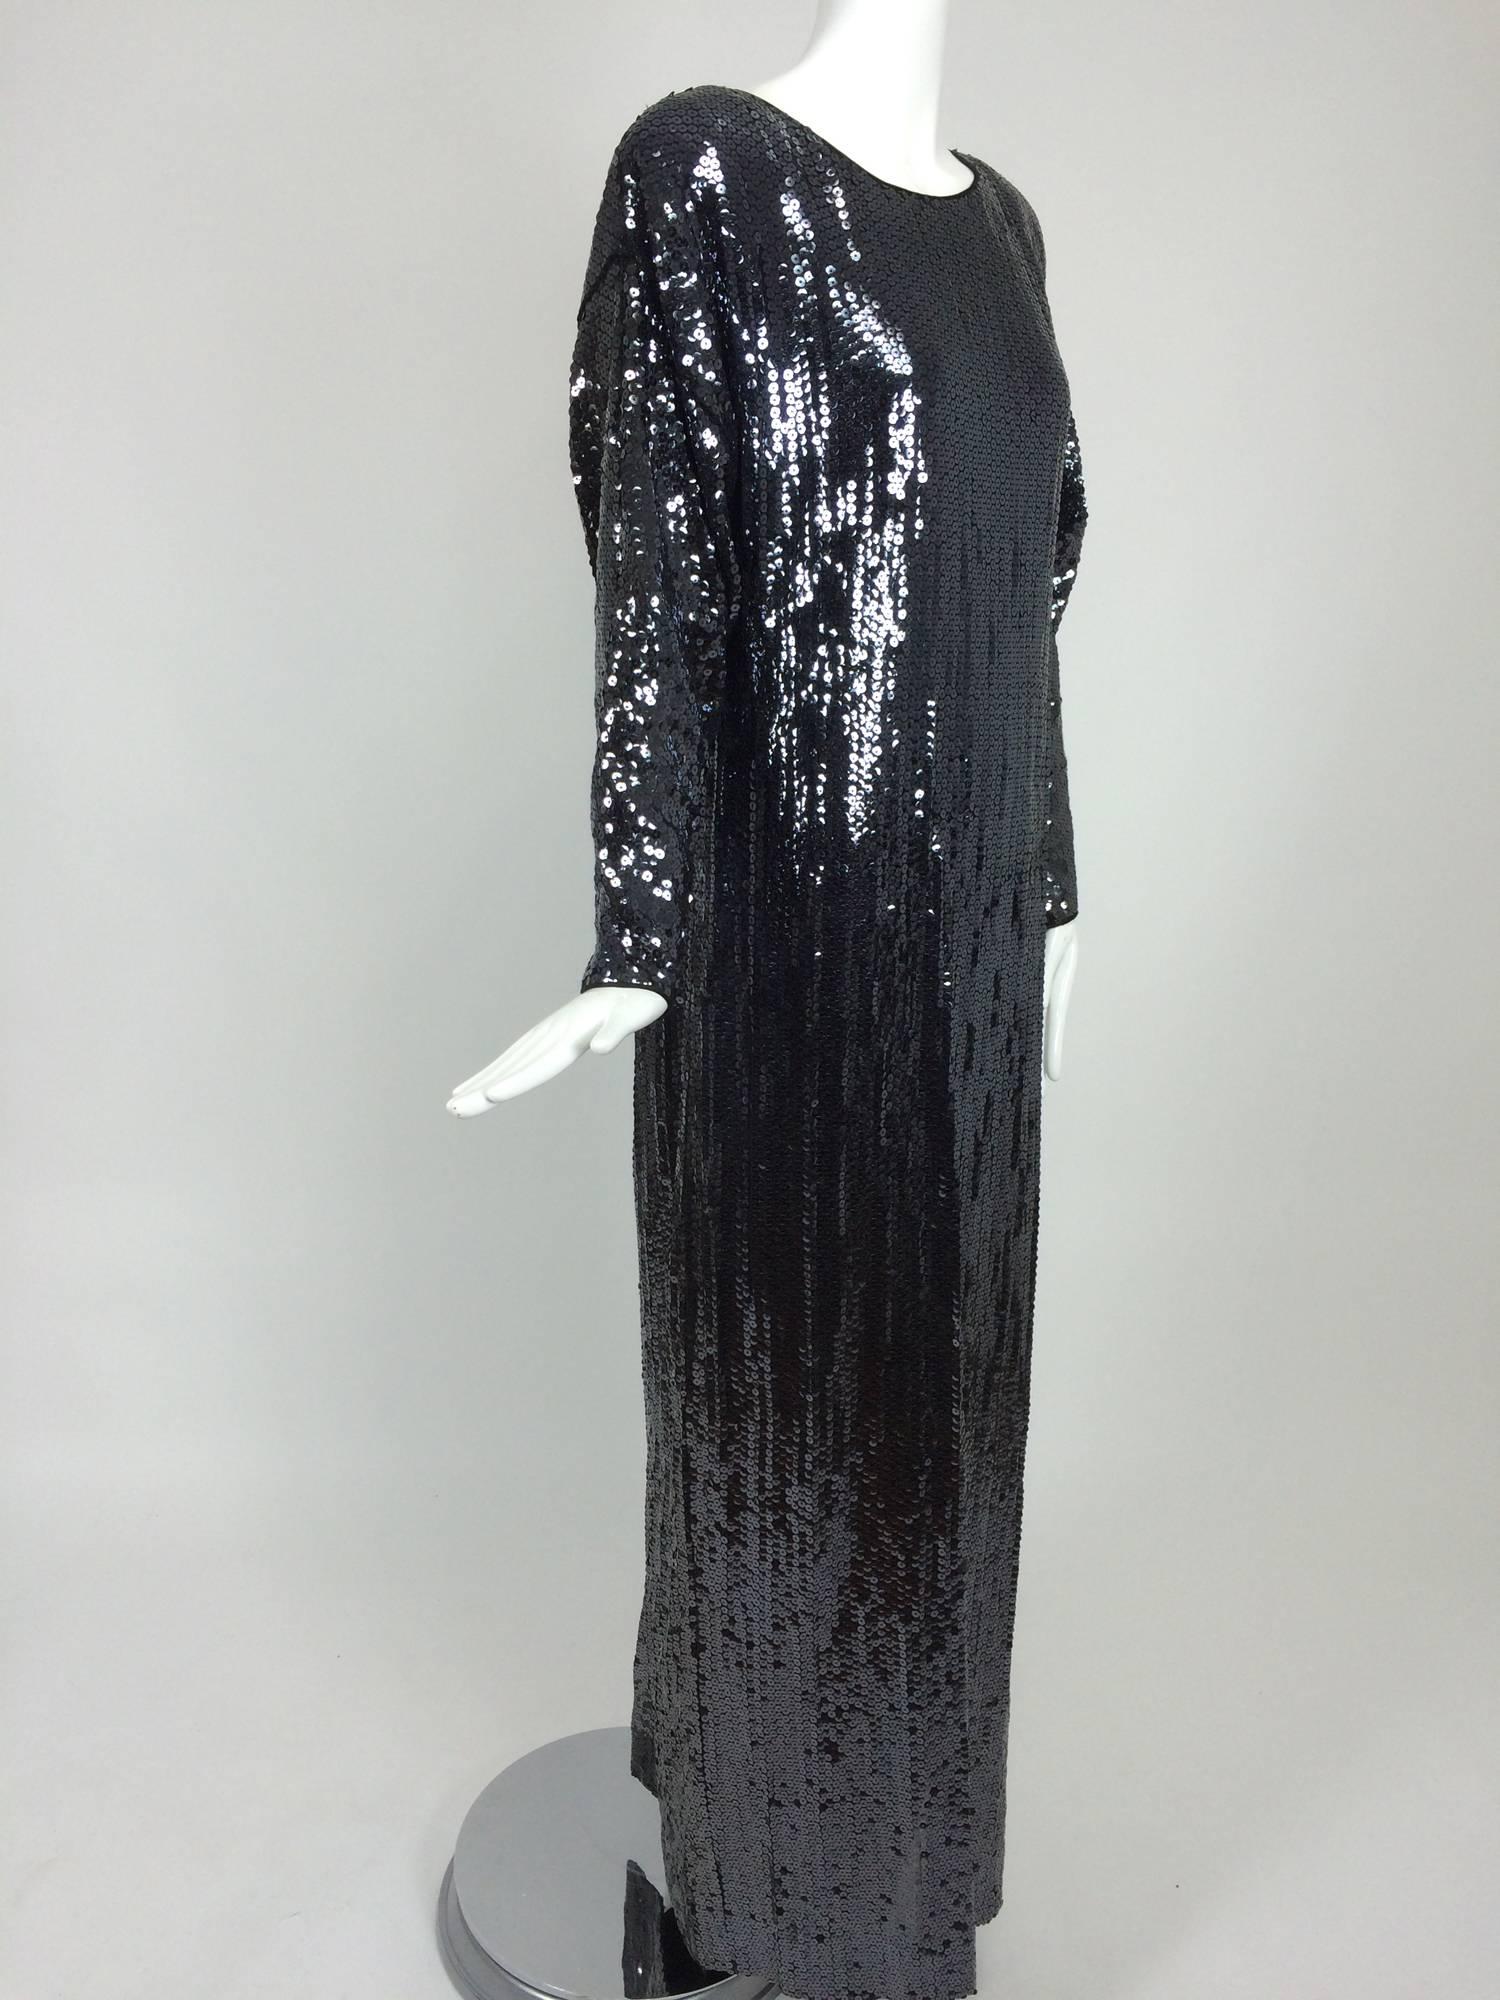 Halston, glittery black sequin bat wing evening gown from the late 1970s. Bateau neckline gown is trimmed with satin facings, long bat wing sleeves taper to the wrist. The dress has a deep sexy center back vent for ease in walking. Covered in inky